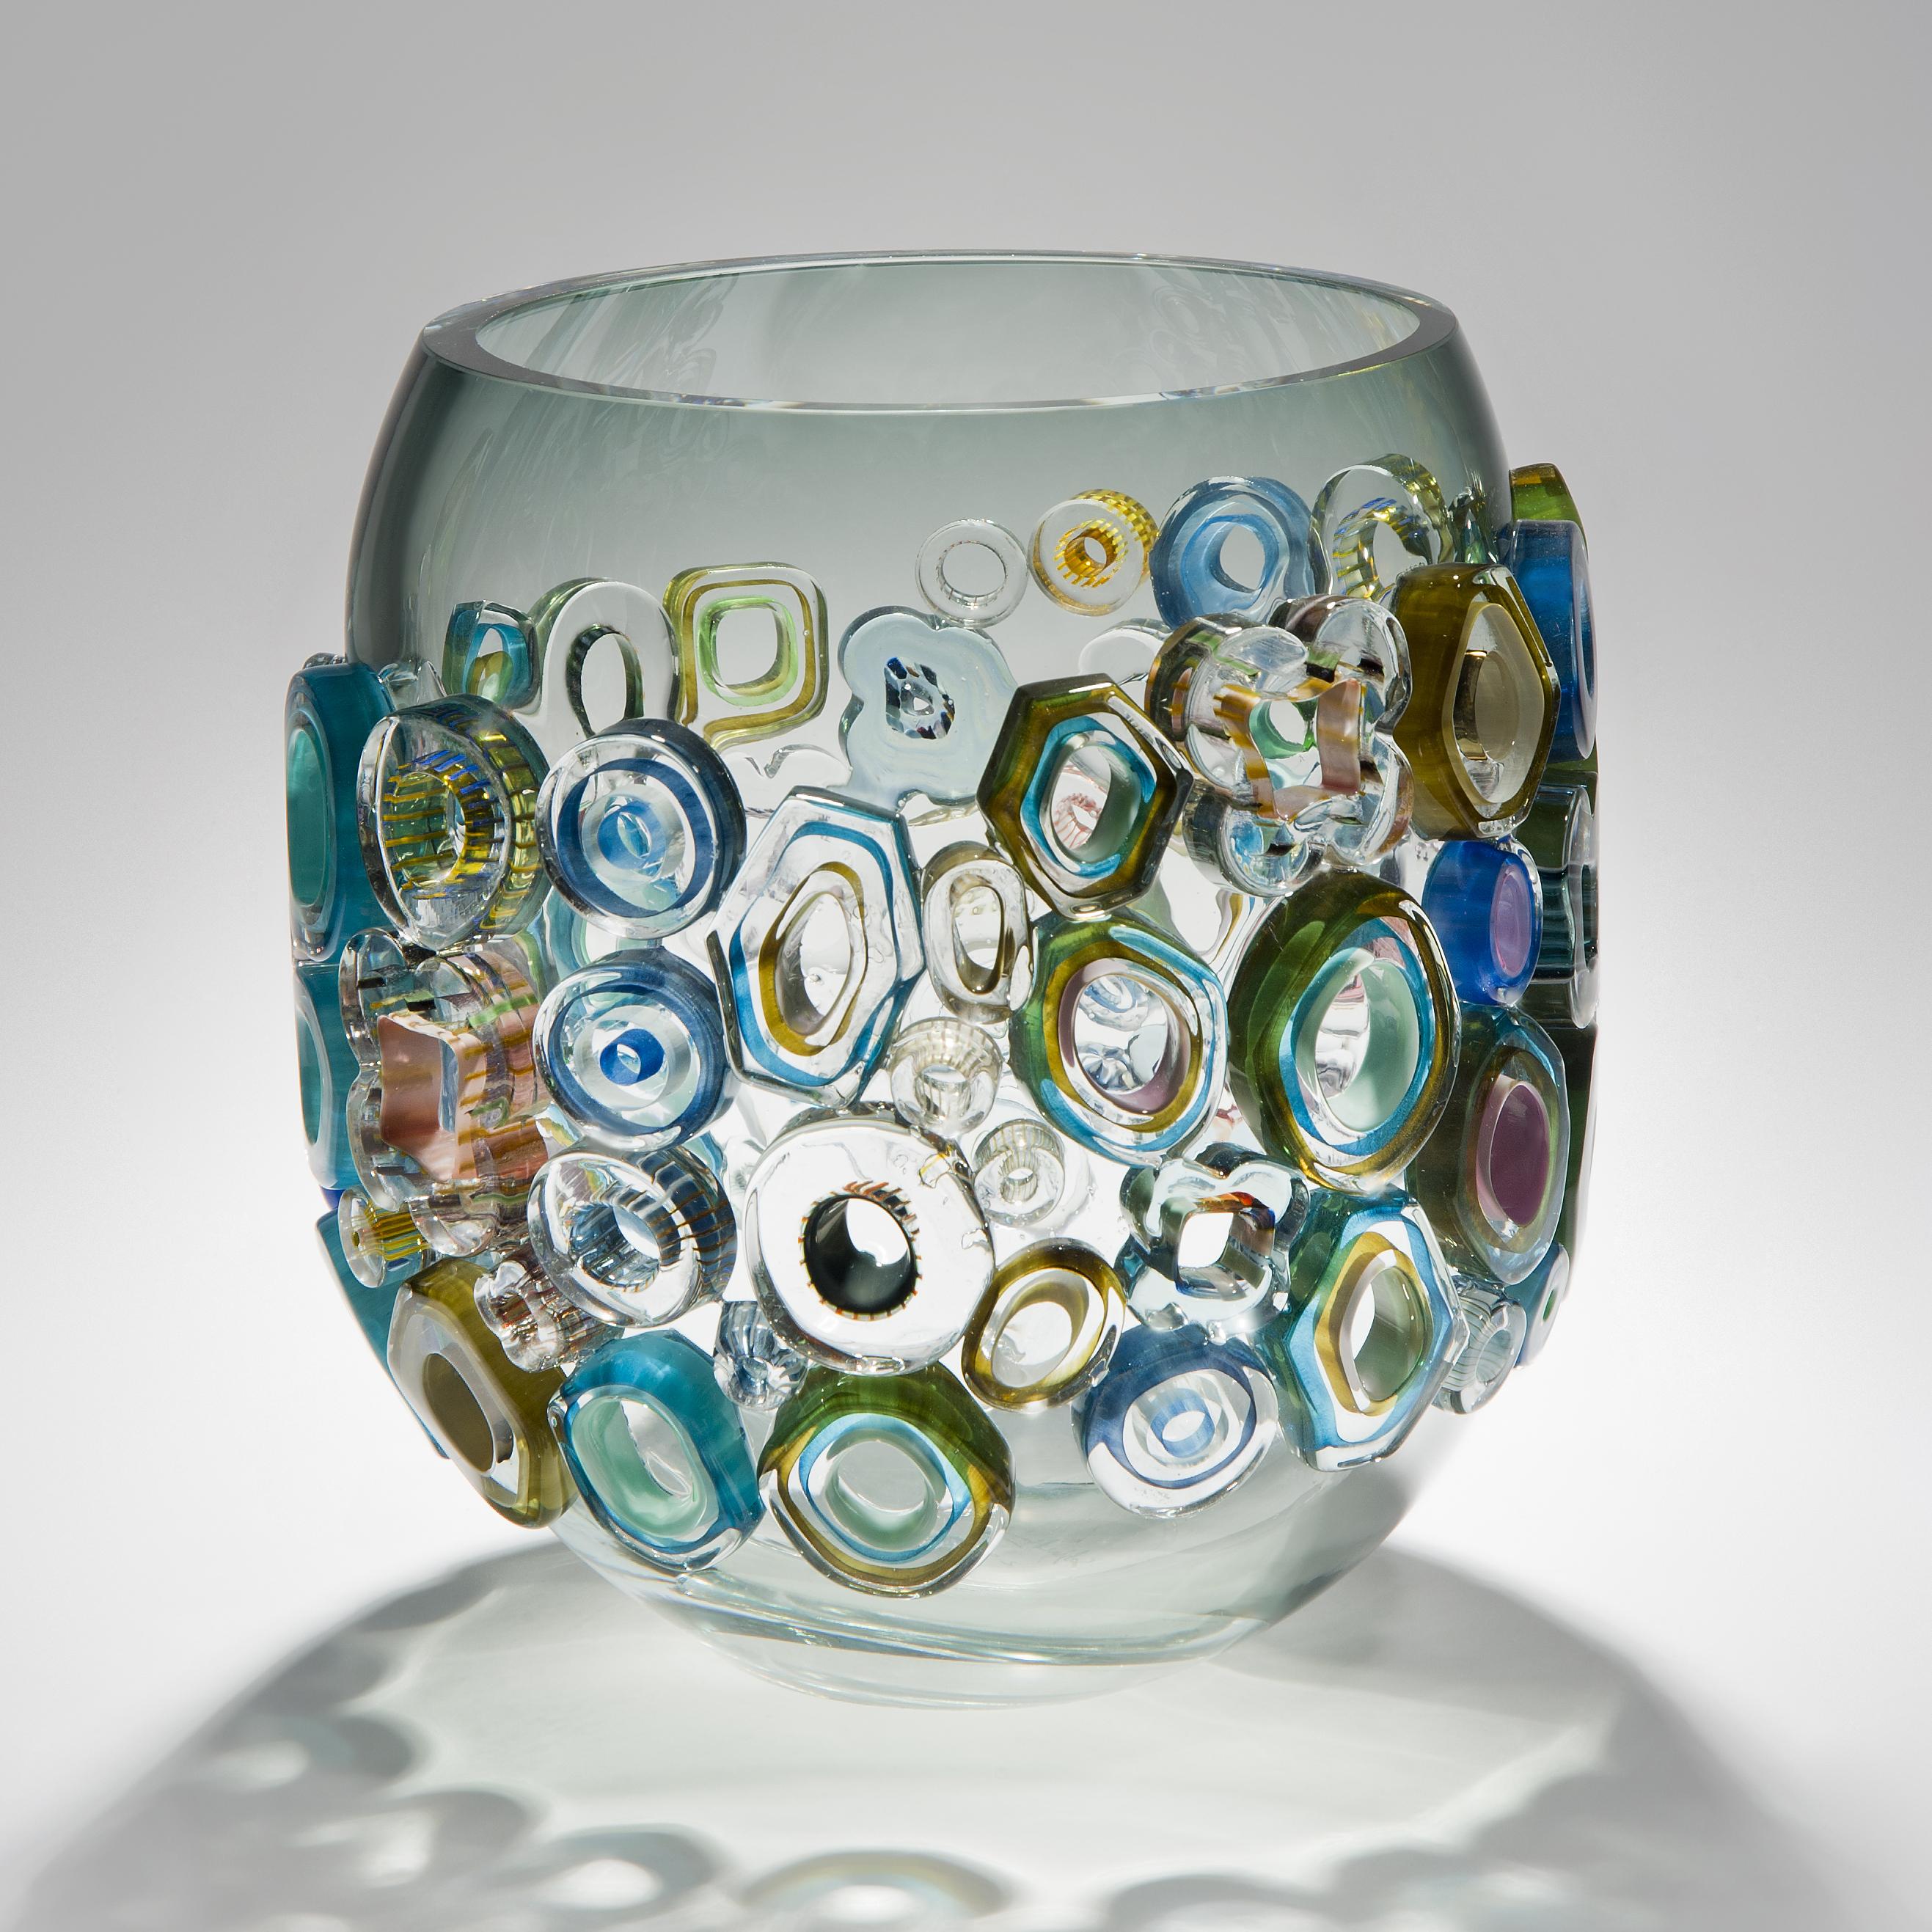 Common ray blue green with green diamonds is a unique hand blown and crafted vase by the German artist, Sabine Lintzen. The initial inner form is free-blown and adorned with various individually shaped murrini, all created in a mix of colored glass